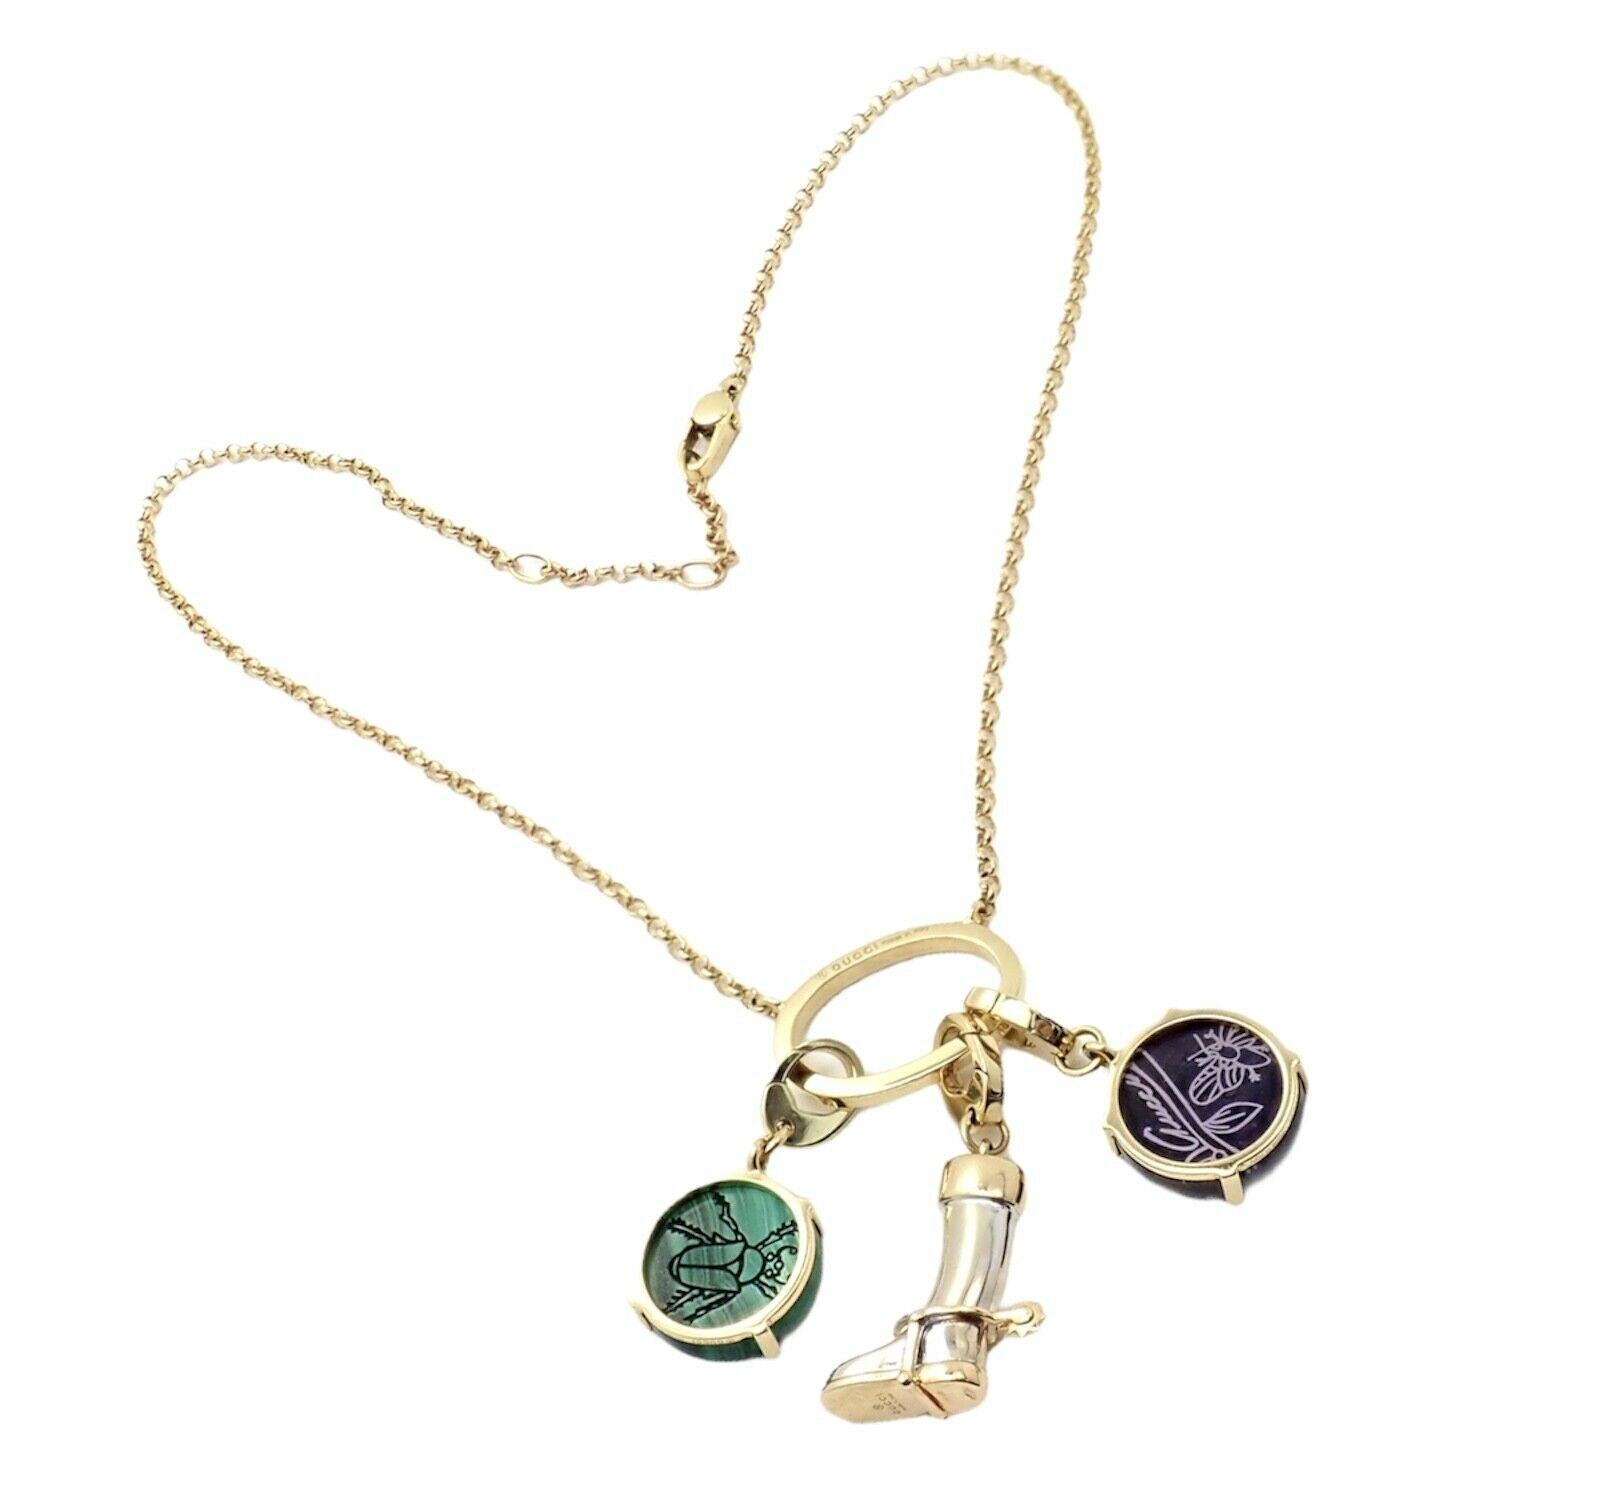 18k yellow and white gold riding boot beetle multi charm pendant necklace from Gucci.
With Green Malachite: 15mm x 3mm
Purple Amethyst: 15mm x 3mm
Measurements: Necklace Chain Length: 16